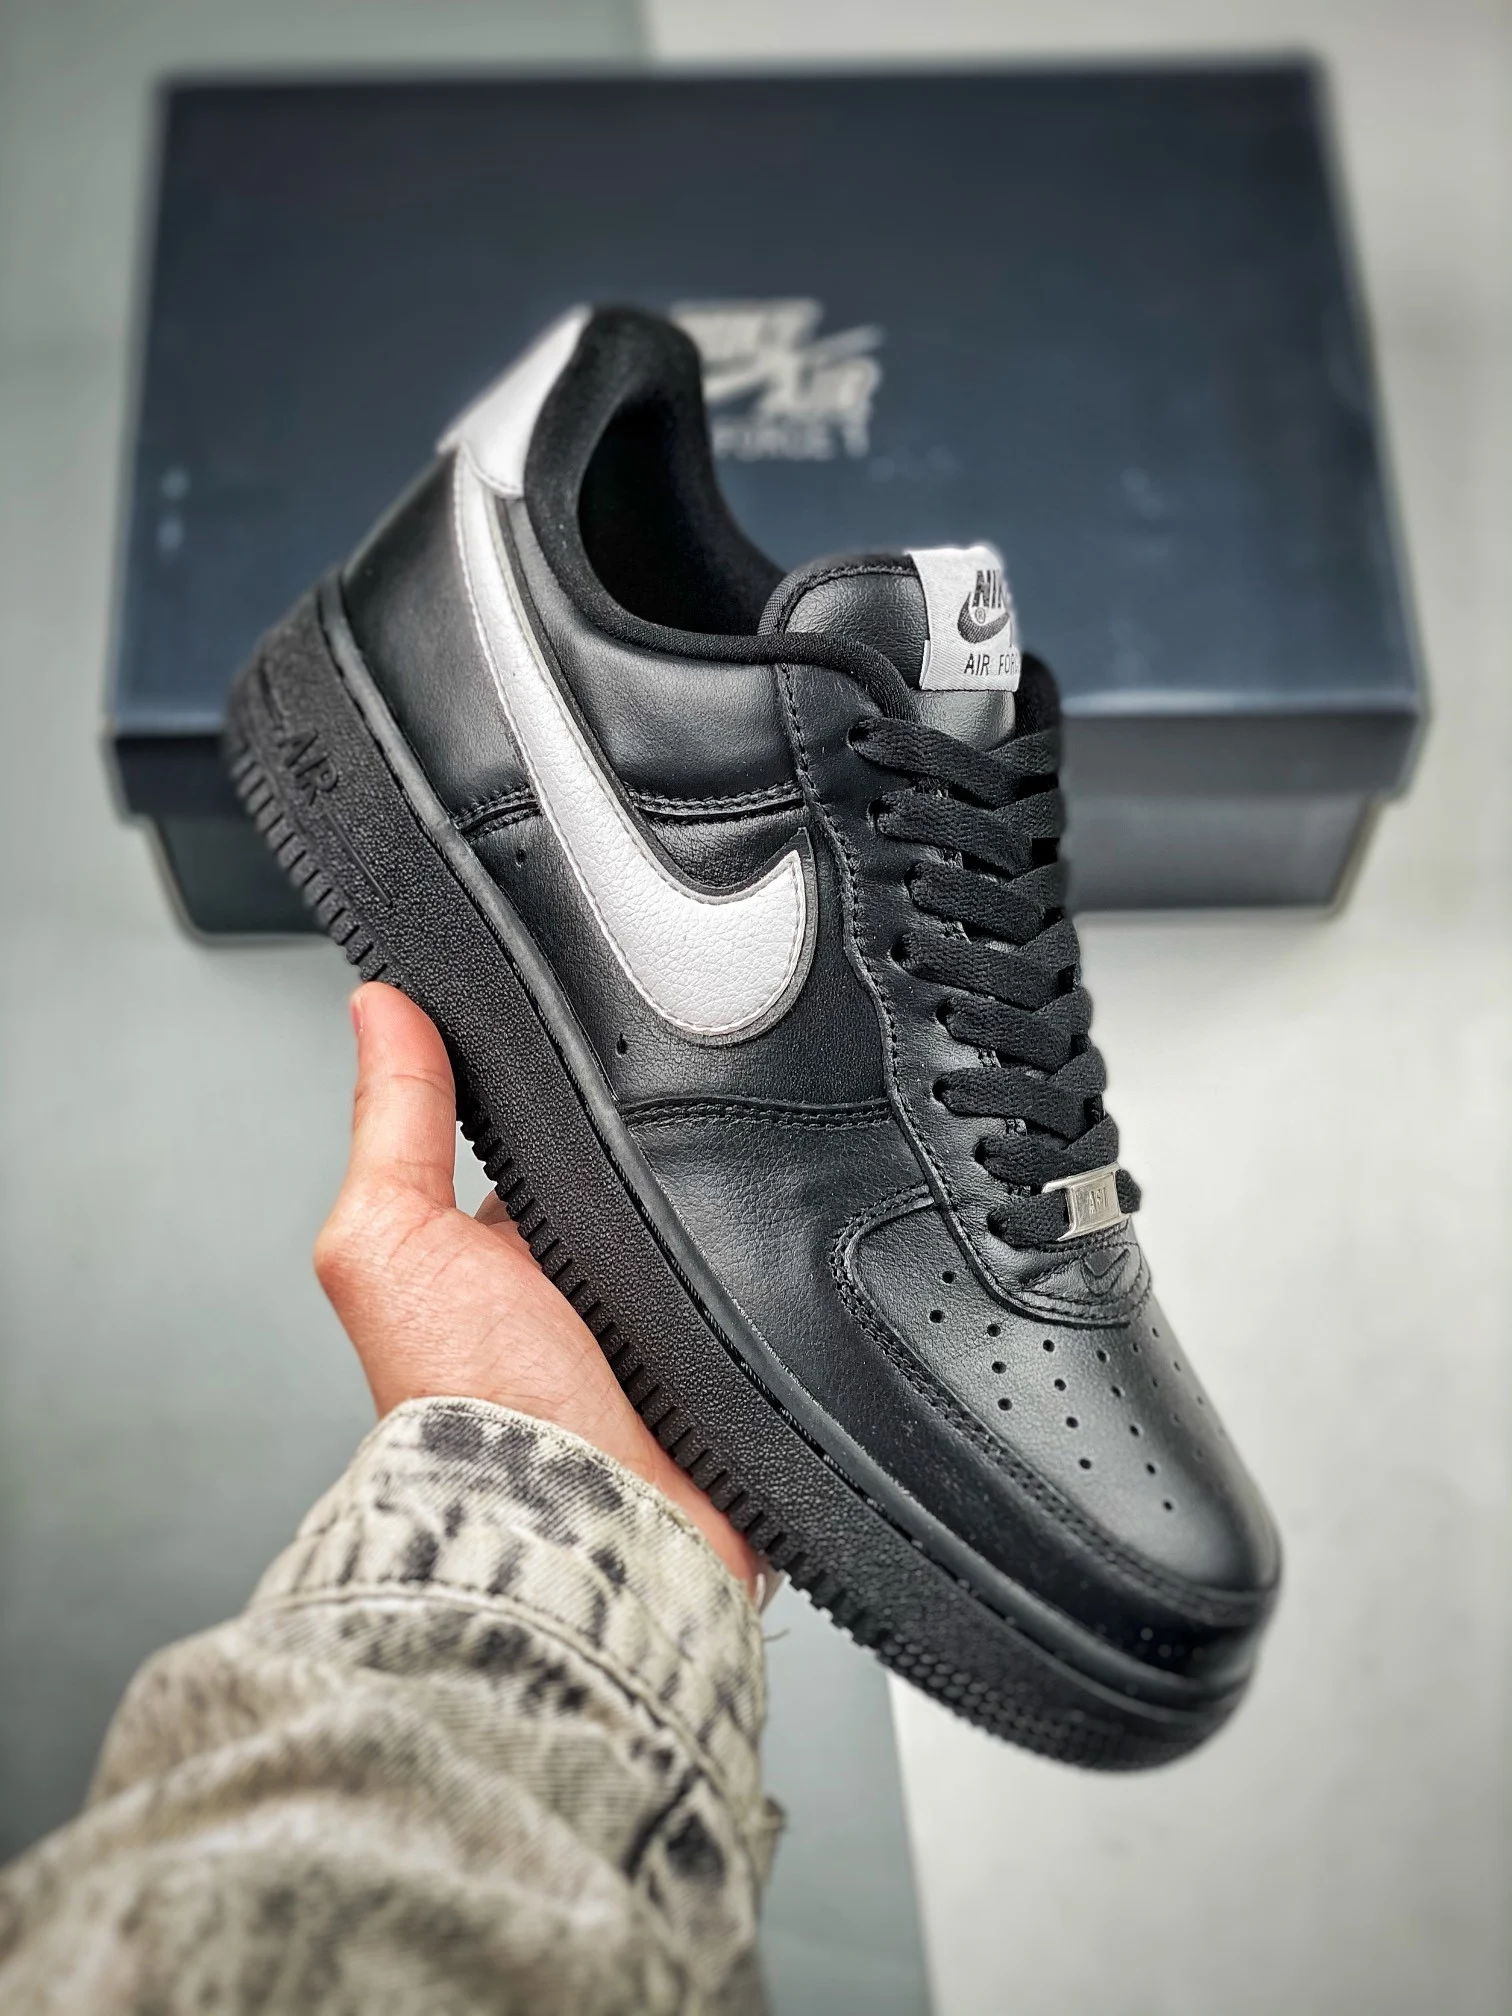 Nike Air Force 1 Low QS Black White CQ0492-001 For Sale